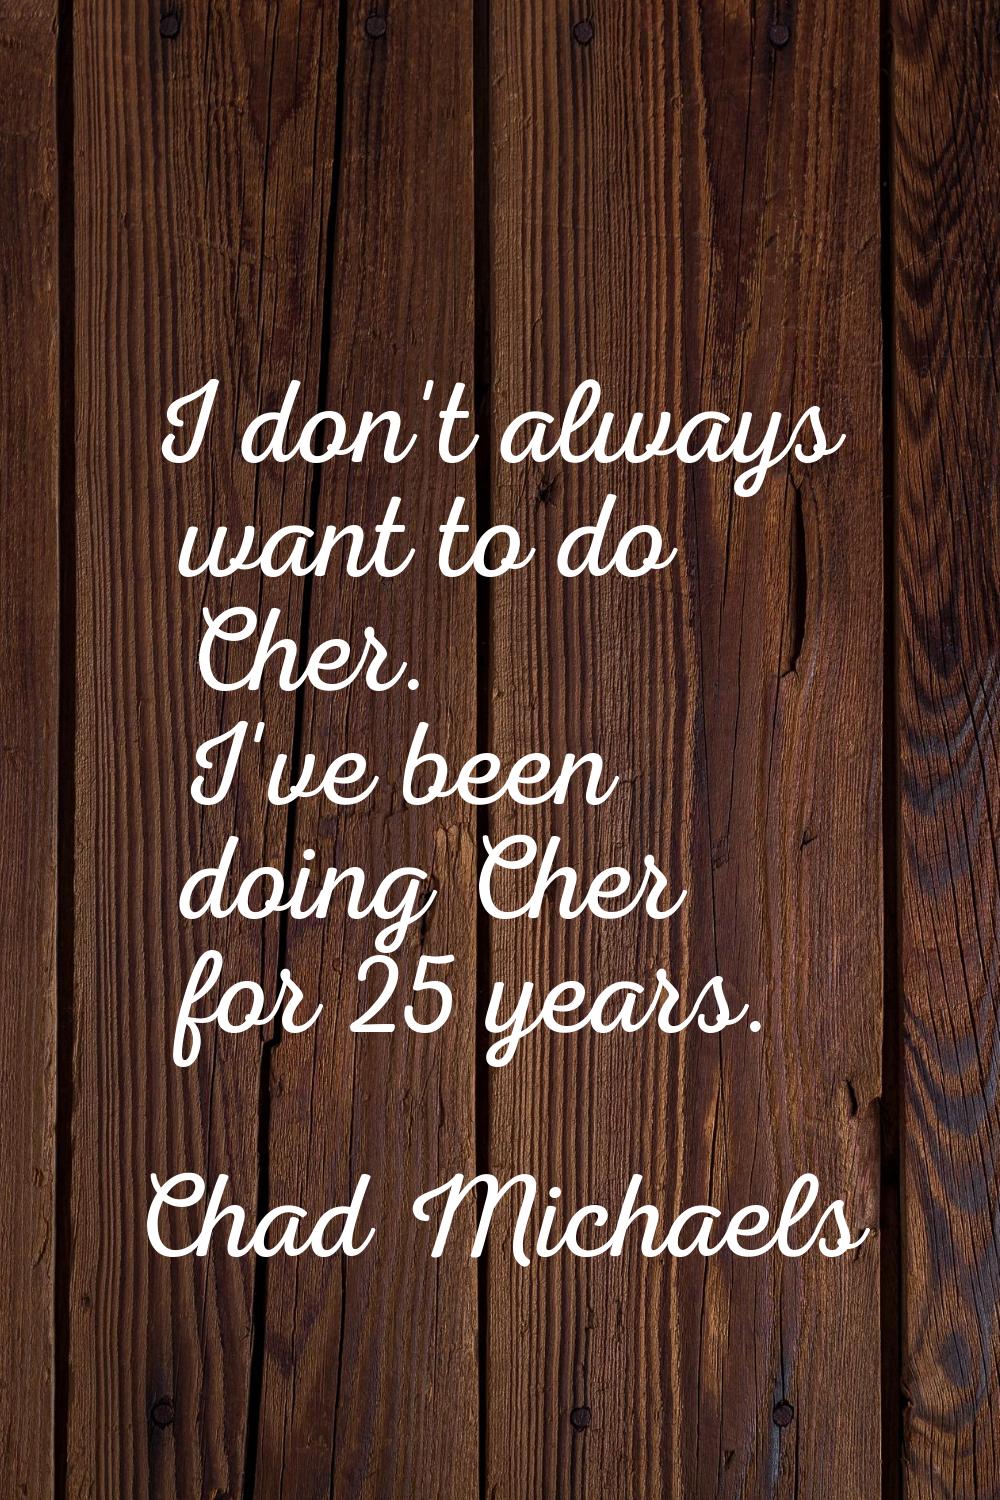 I don't always want to do Cher. I've been doing Cher for 25 years.